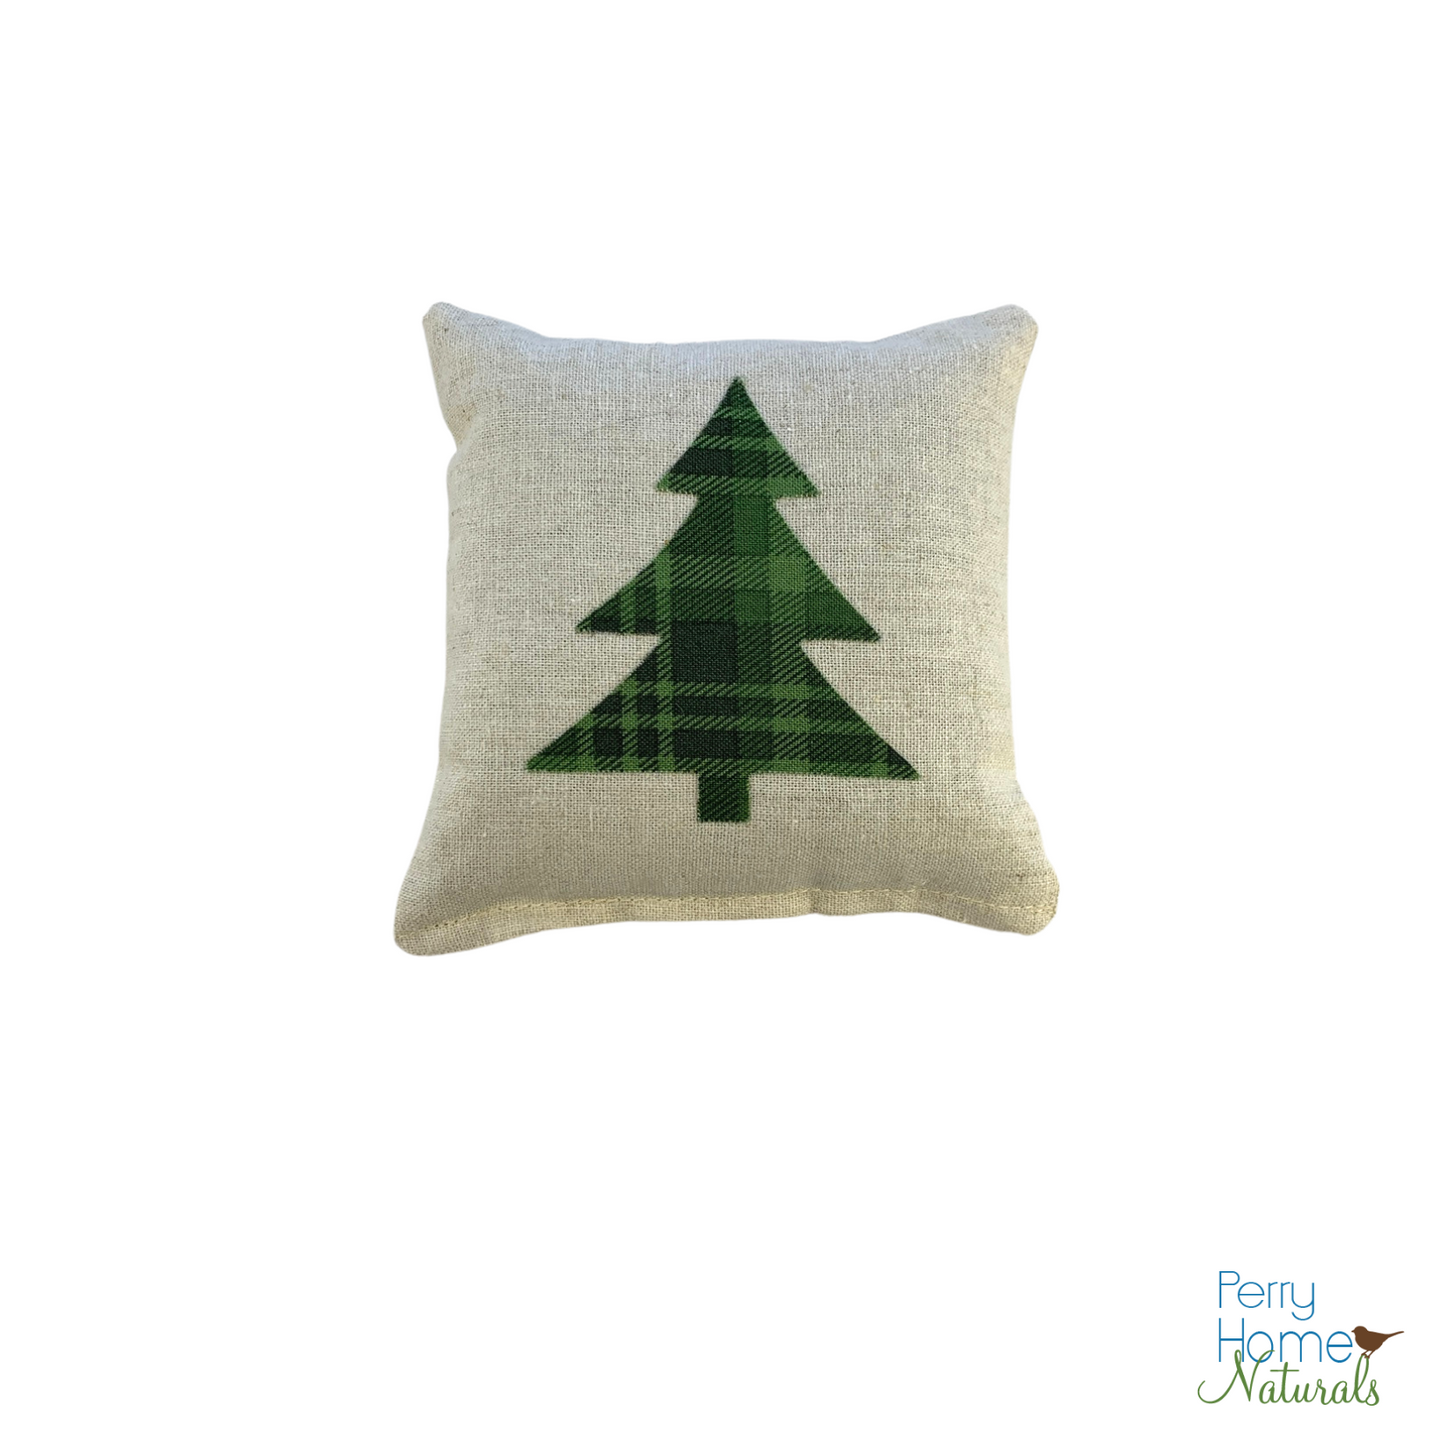 Set of 3 Balsam Fir Sachets with Large Plaid Tree Applique